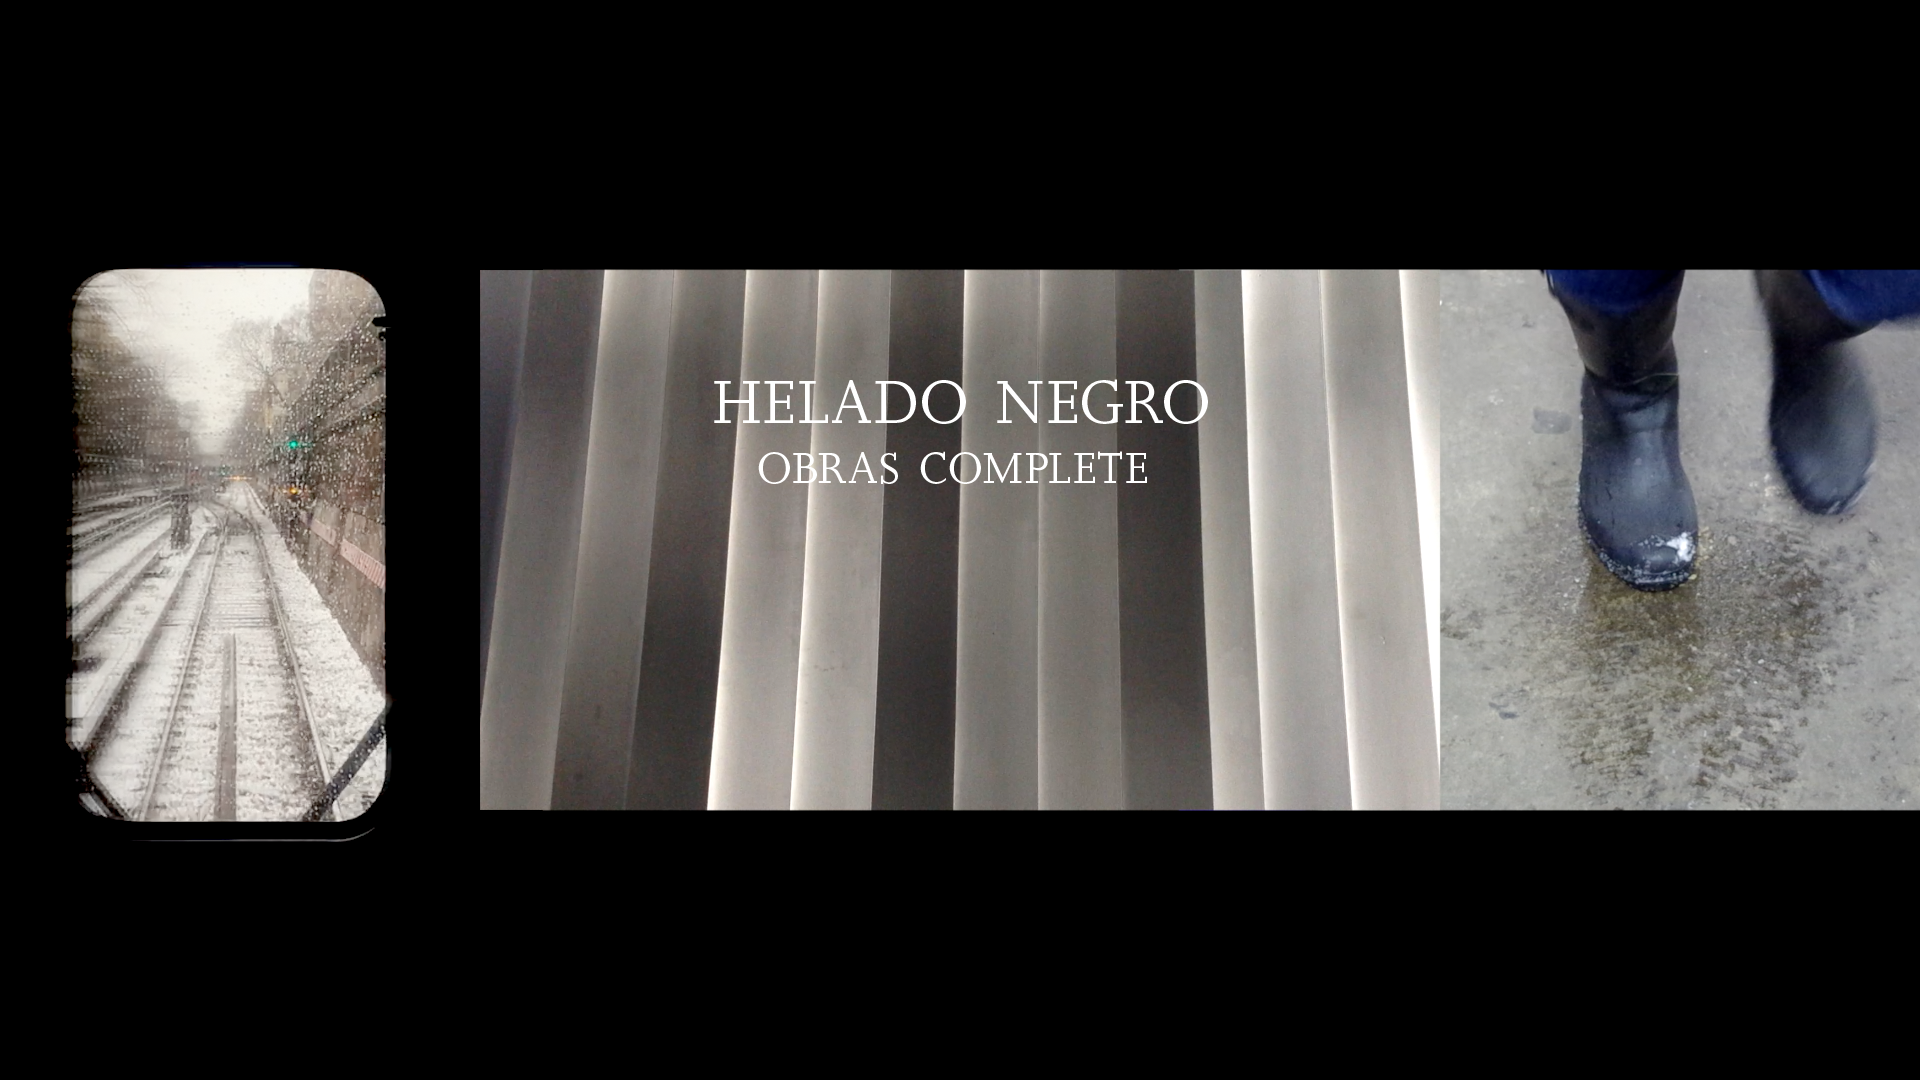 Link to Video for Helado Negro – Obras Complete